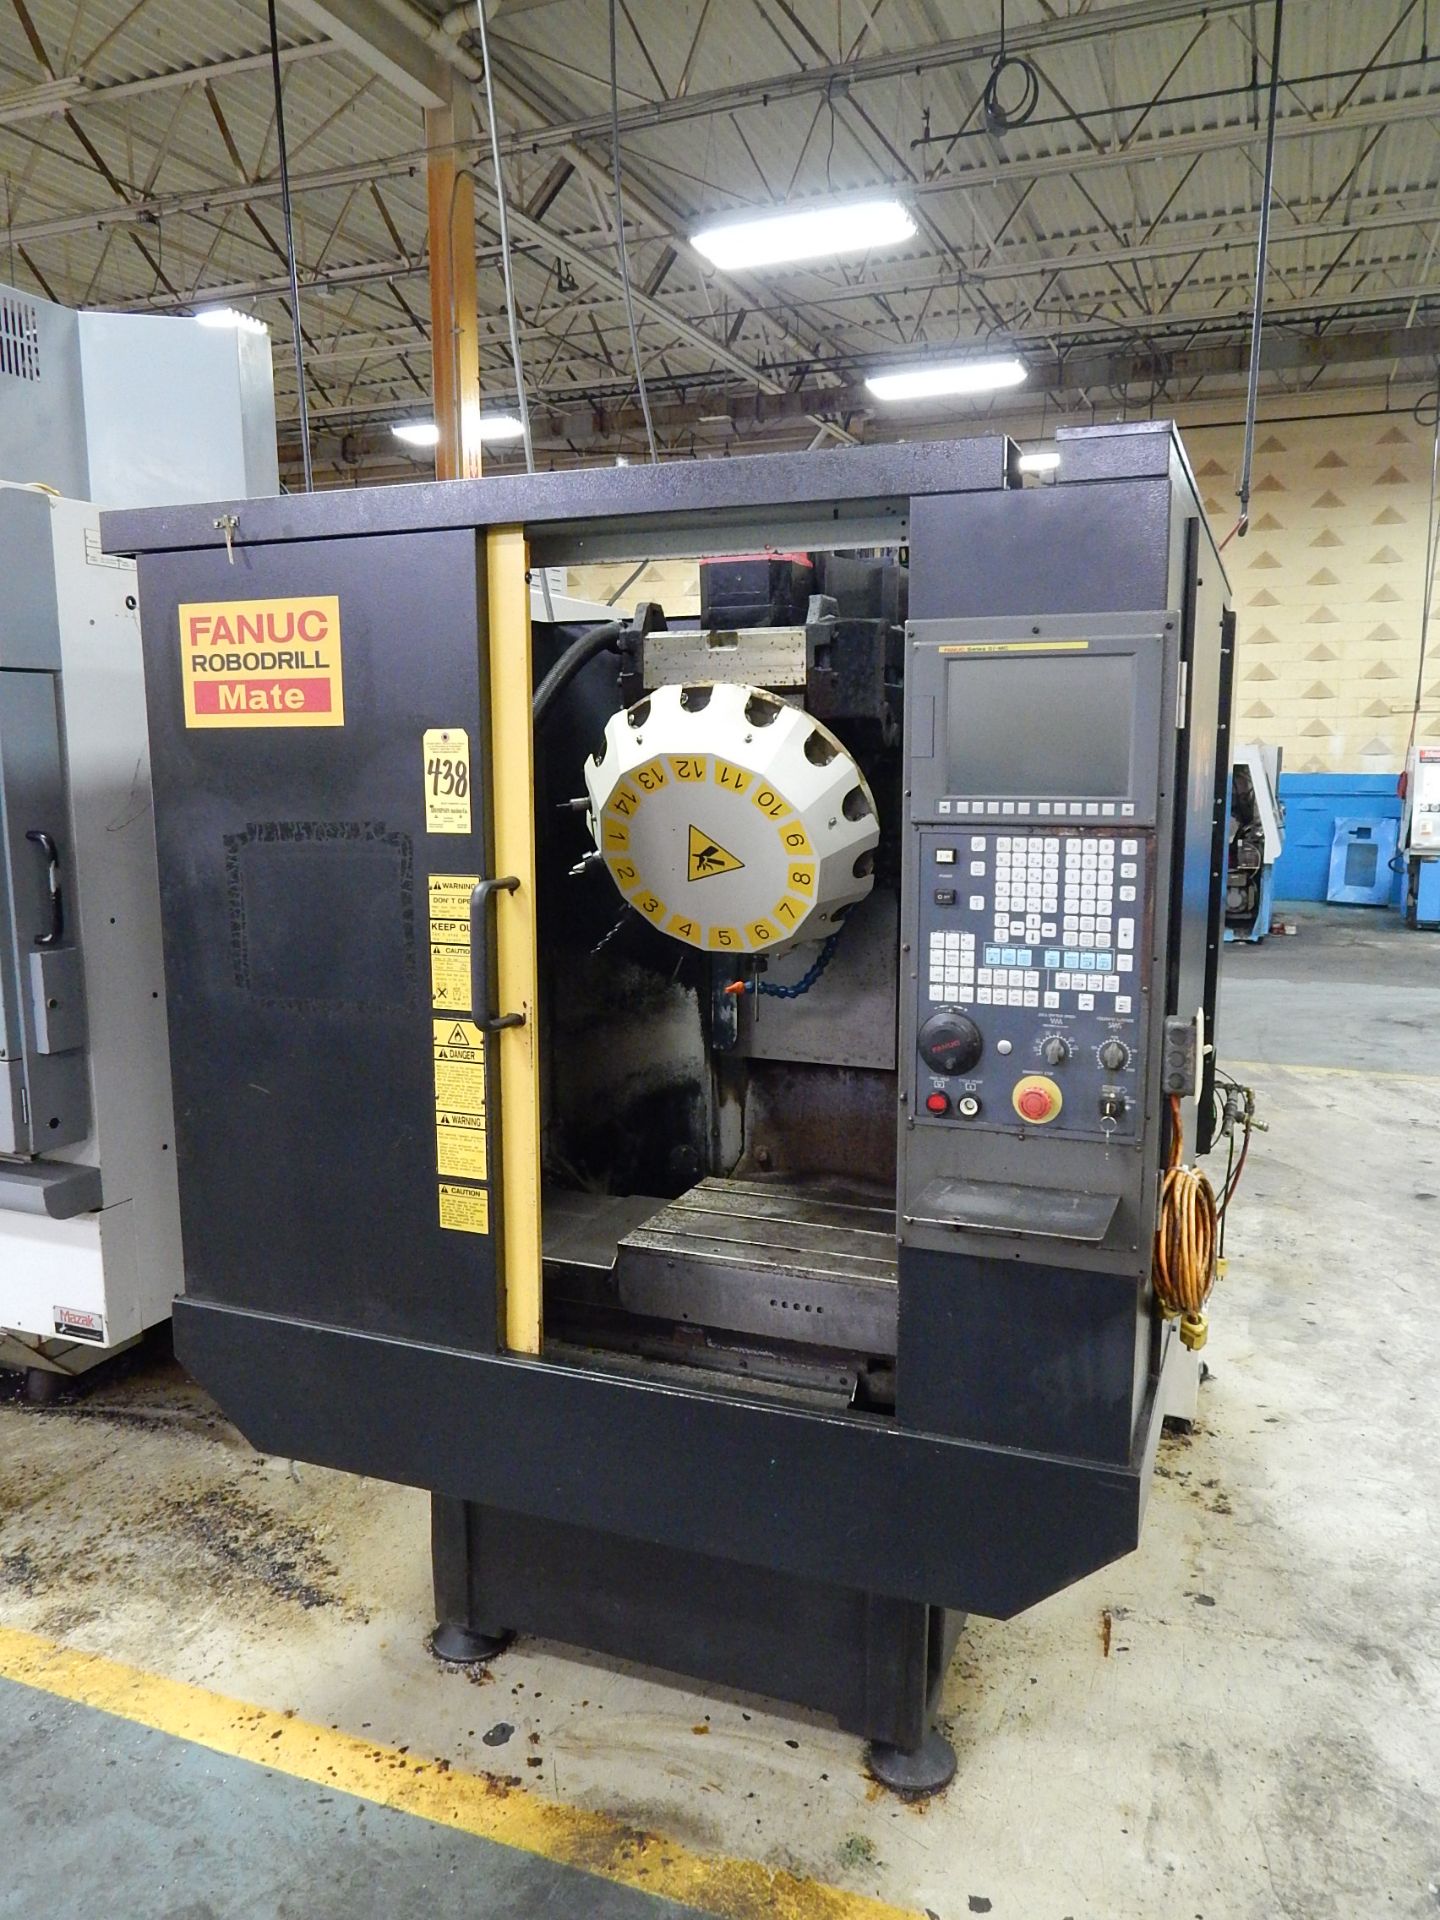 Fanuc Robodrill Mate CNC Drilling and Tapping Machine, s/n P06YN096, New 2006, Fanuc 0-MC CNC - Image 2 of 8